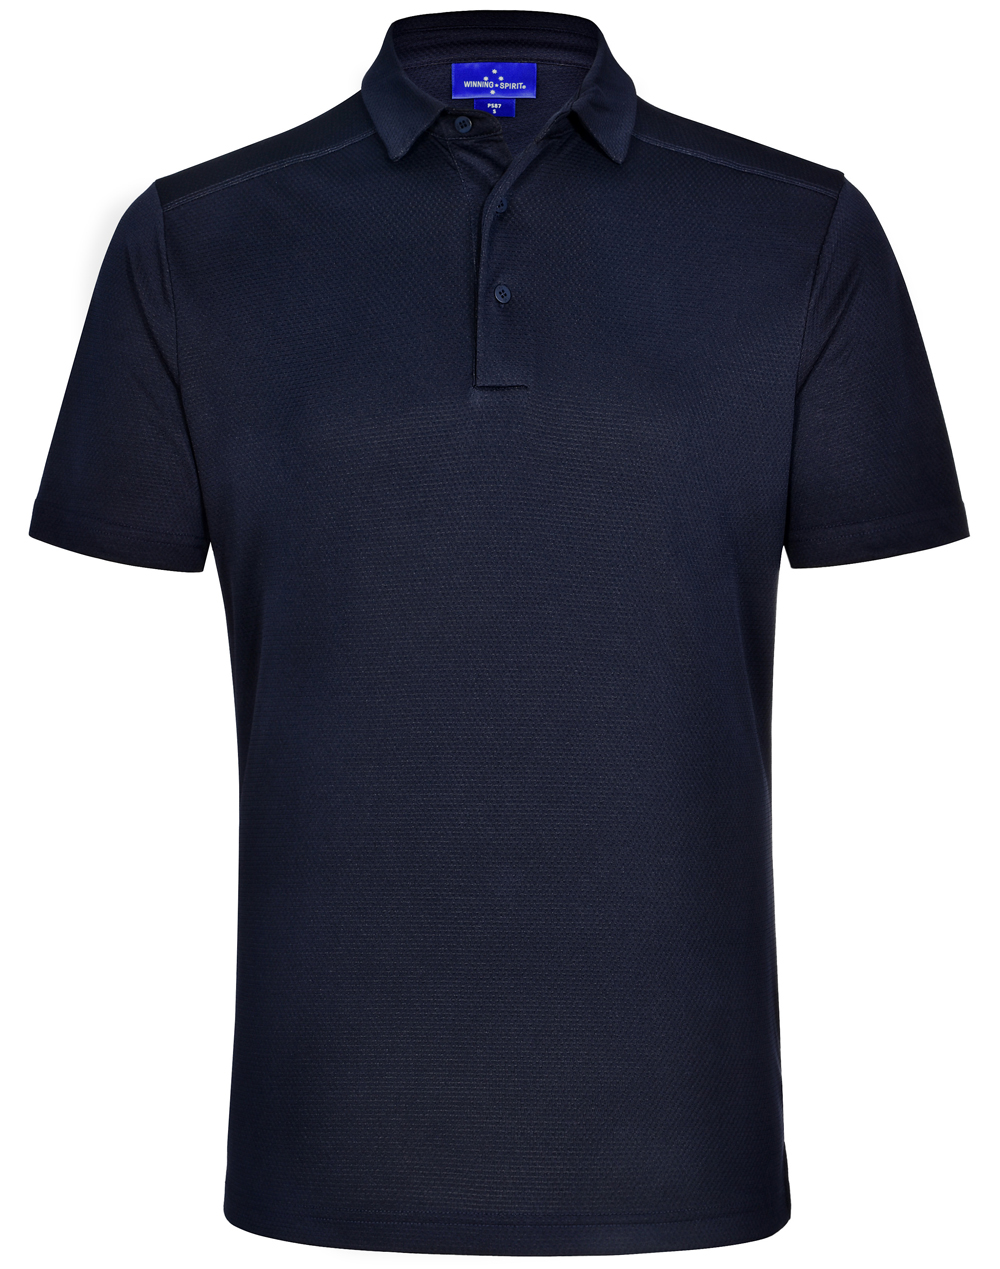 PS87 BAMBOO CHARCOAL CORPORATE SHORT SLEEVE POLO Men’s